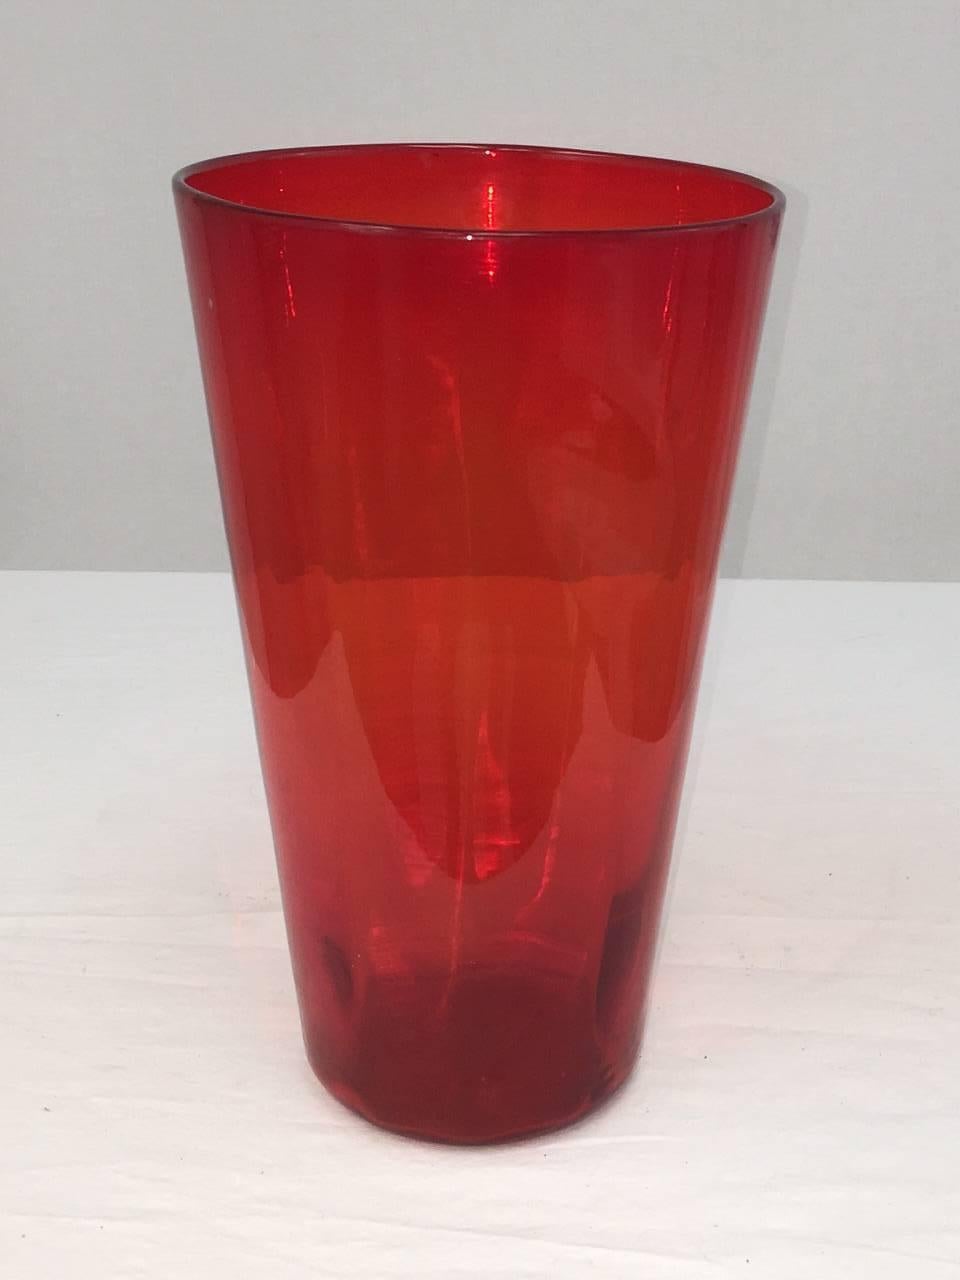 This collectable vase by Blenko is a deep red-orange. It is blown glass by famous maker Blenko. Brilliant color. Measures: 7" at mouth; 4.5" at base.